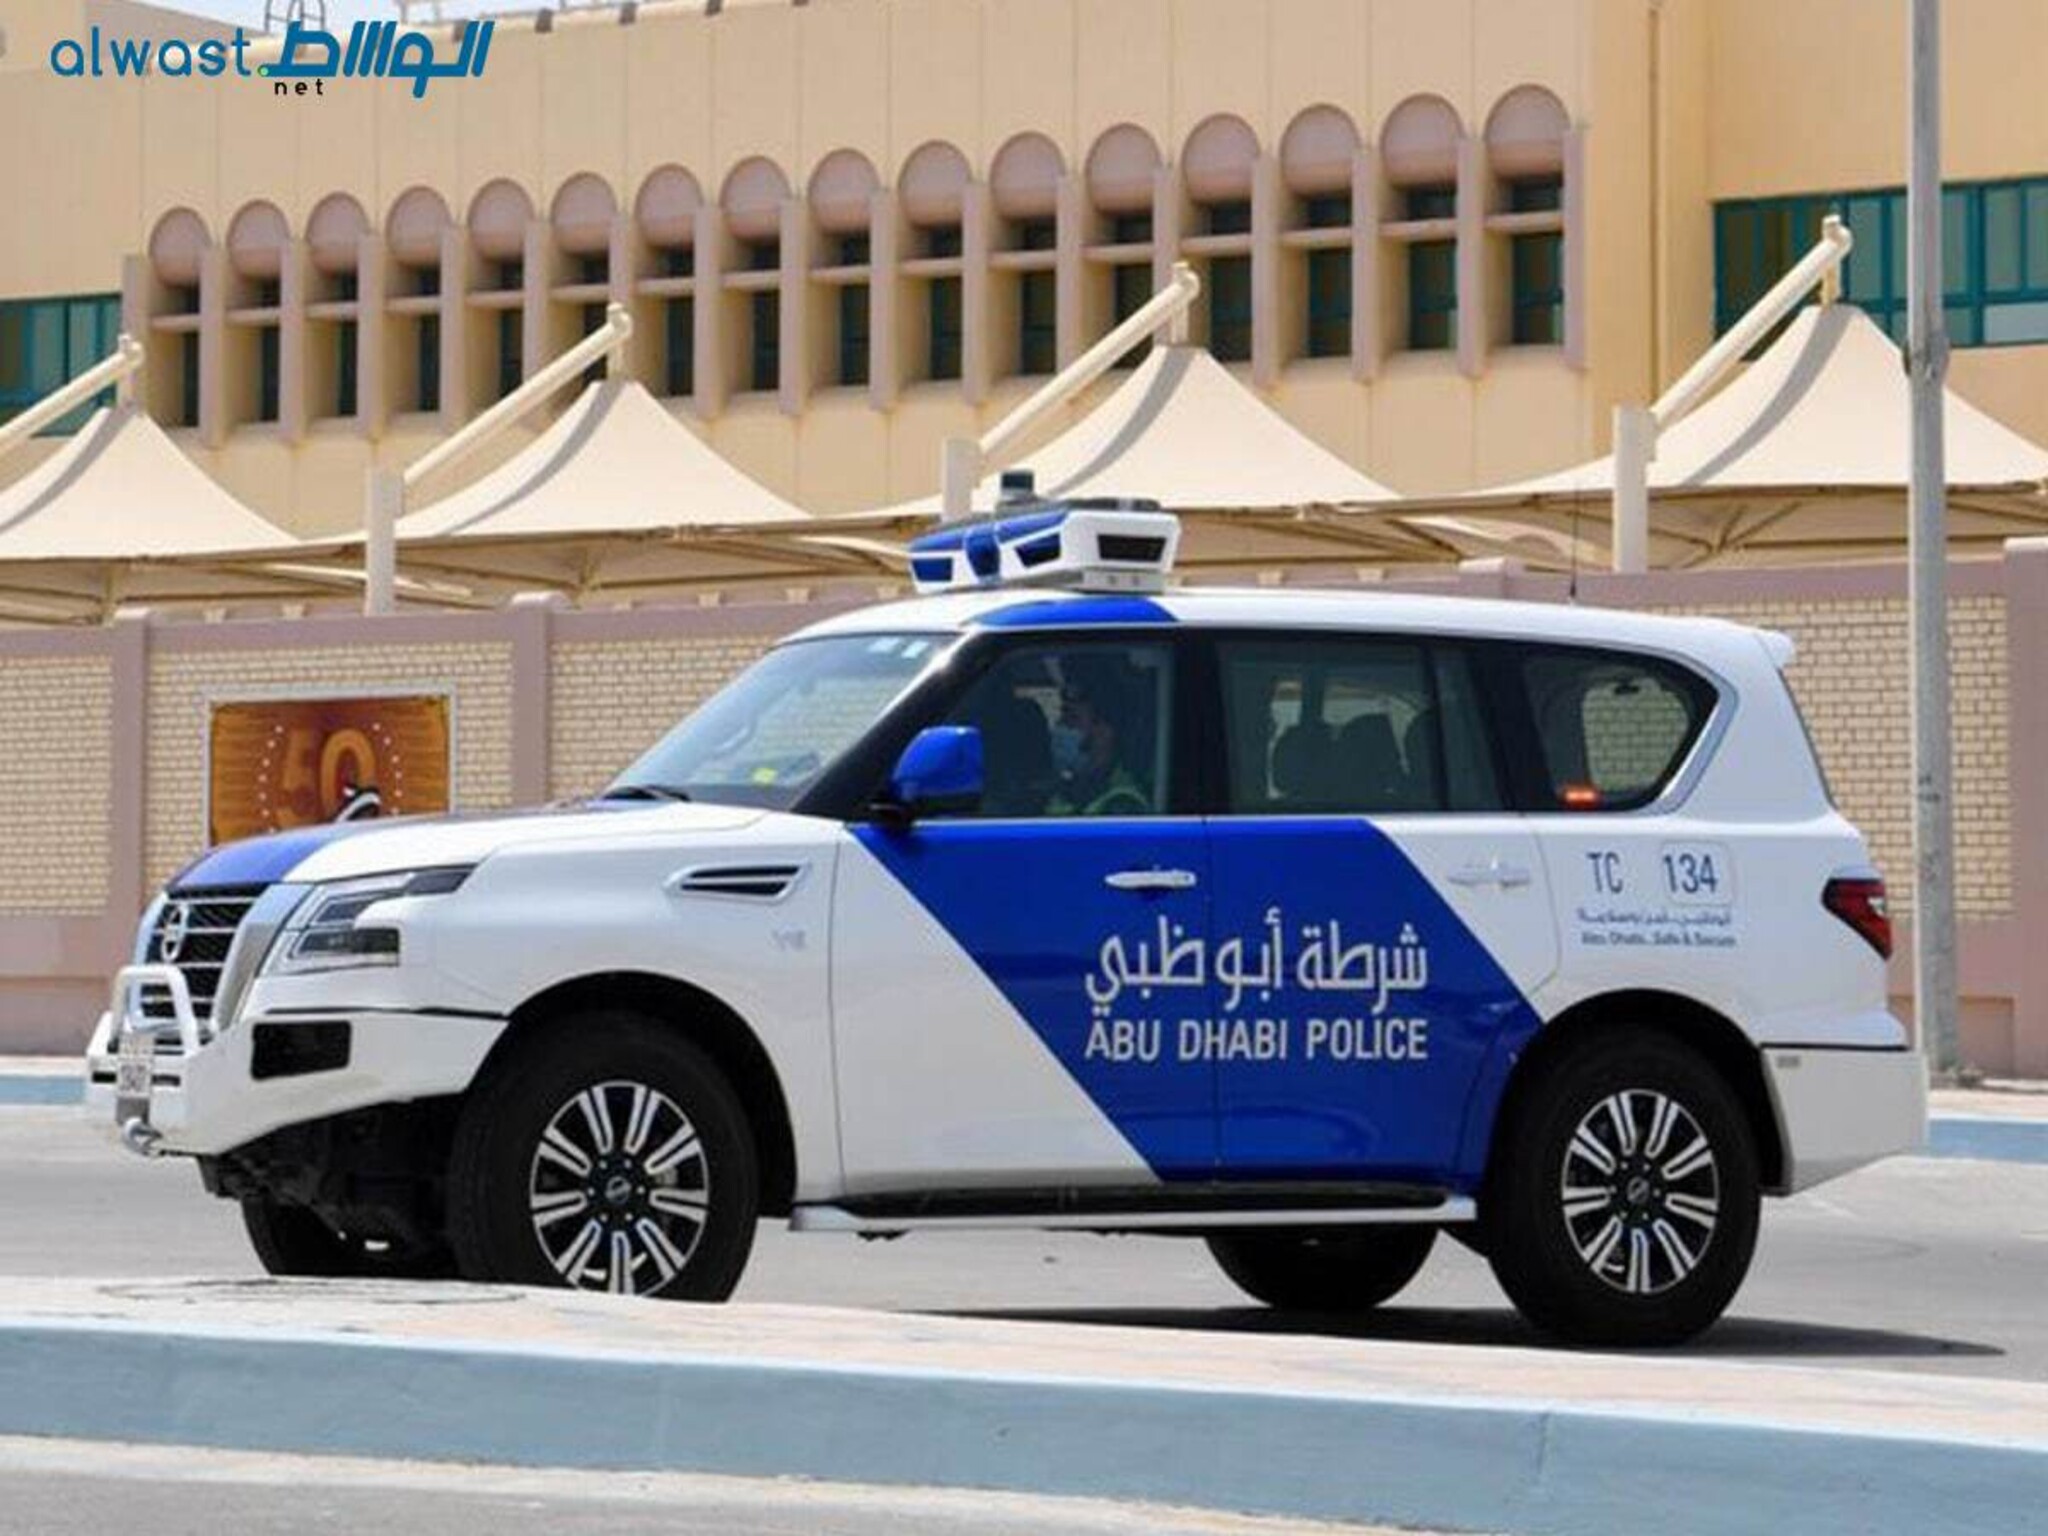 Abu Dhabi Police launches new digital technologies to spread traffic awareness